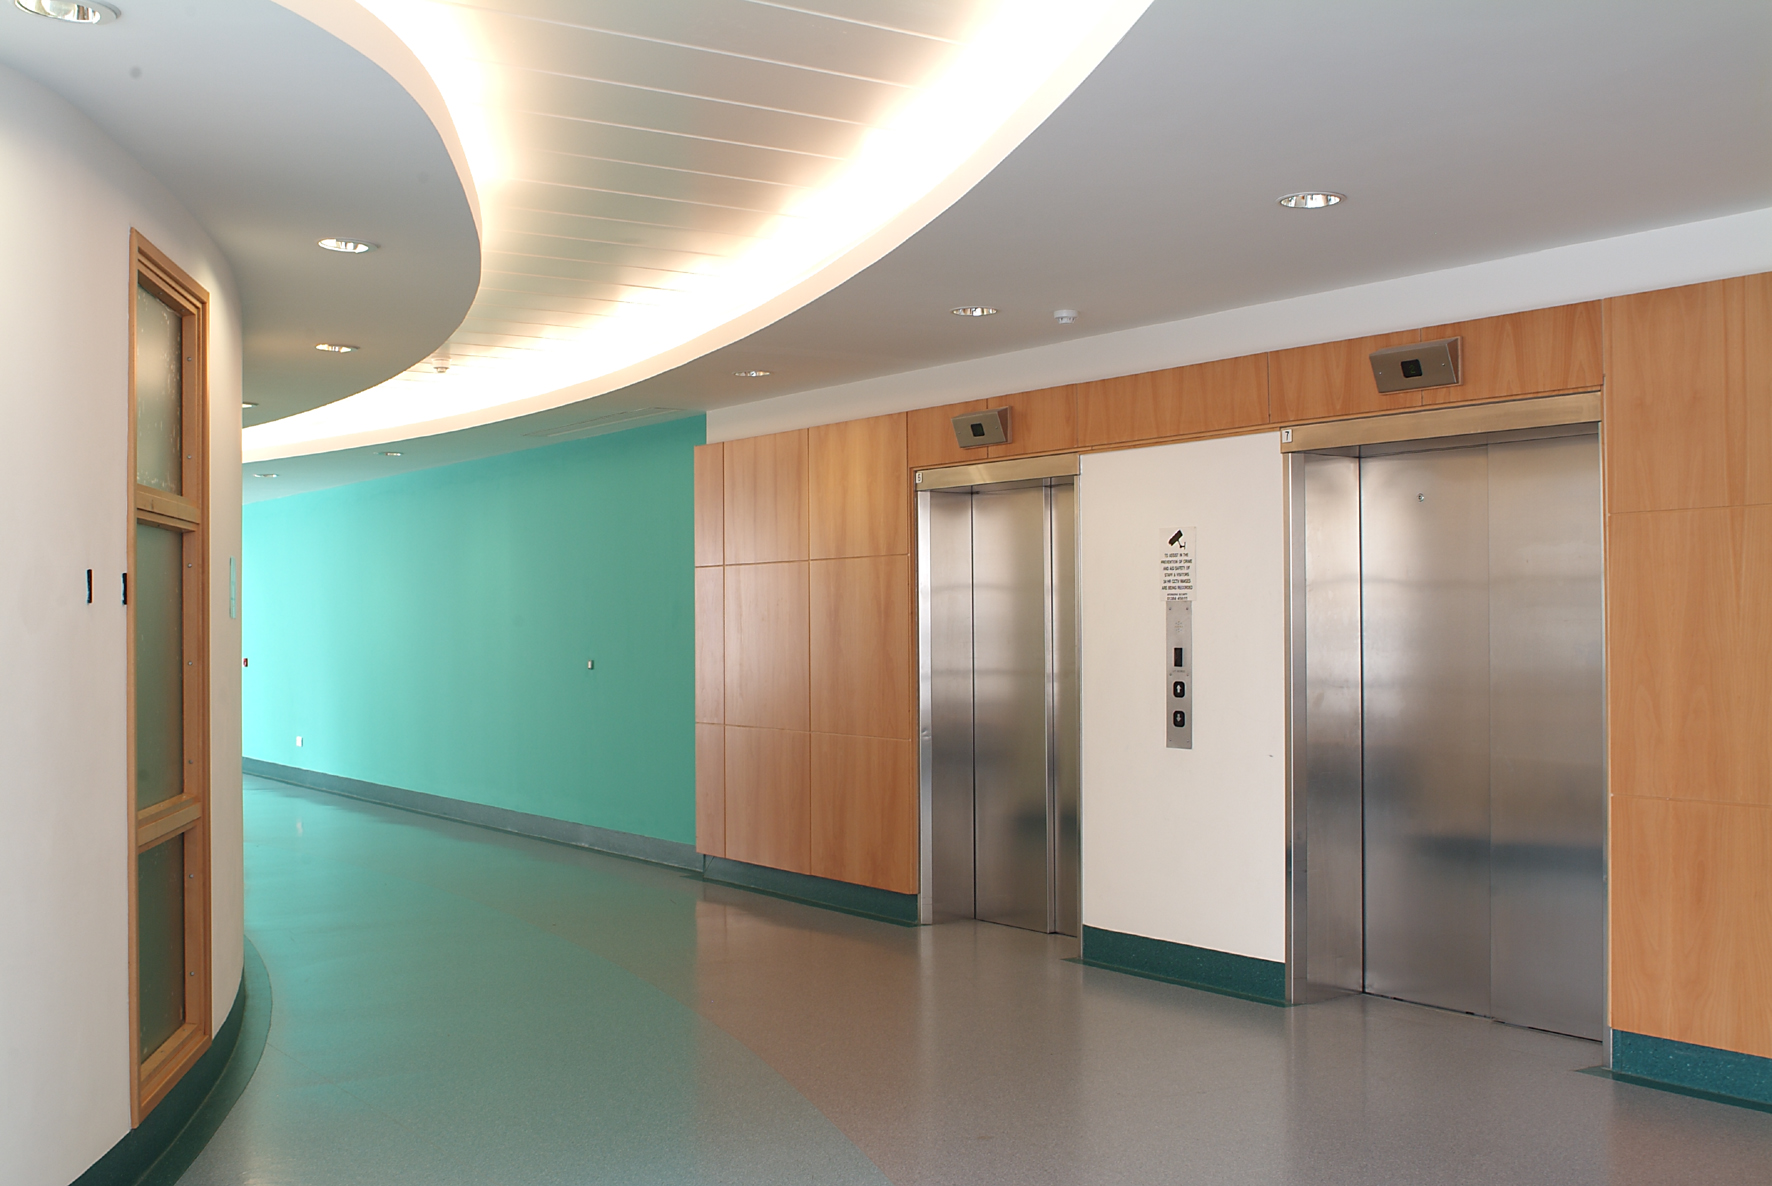 Lifts in Public & Residential Buildings